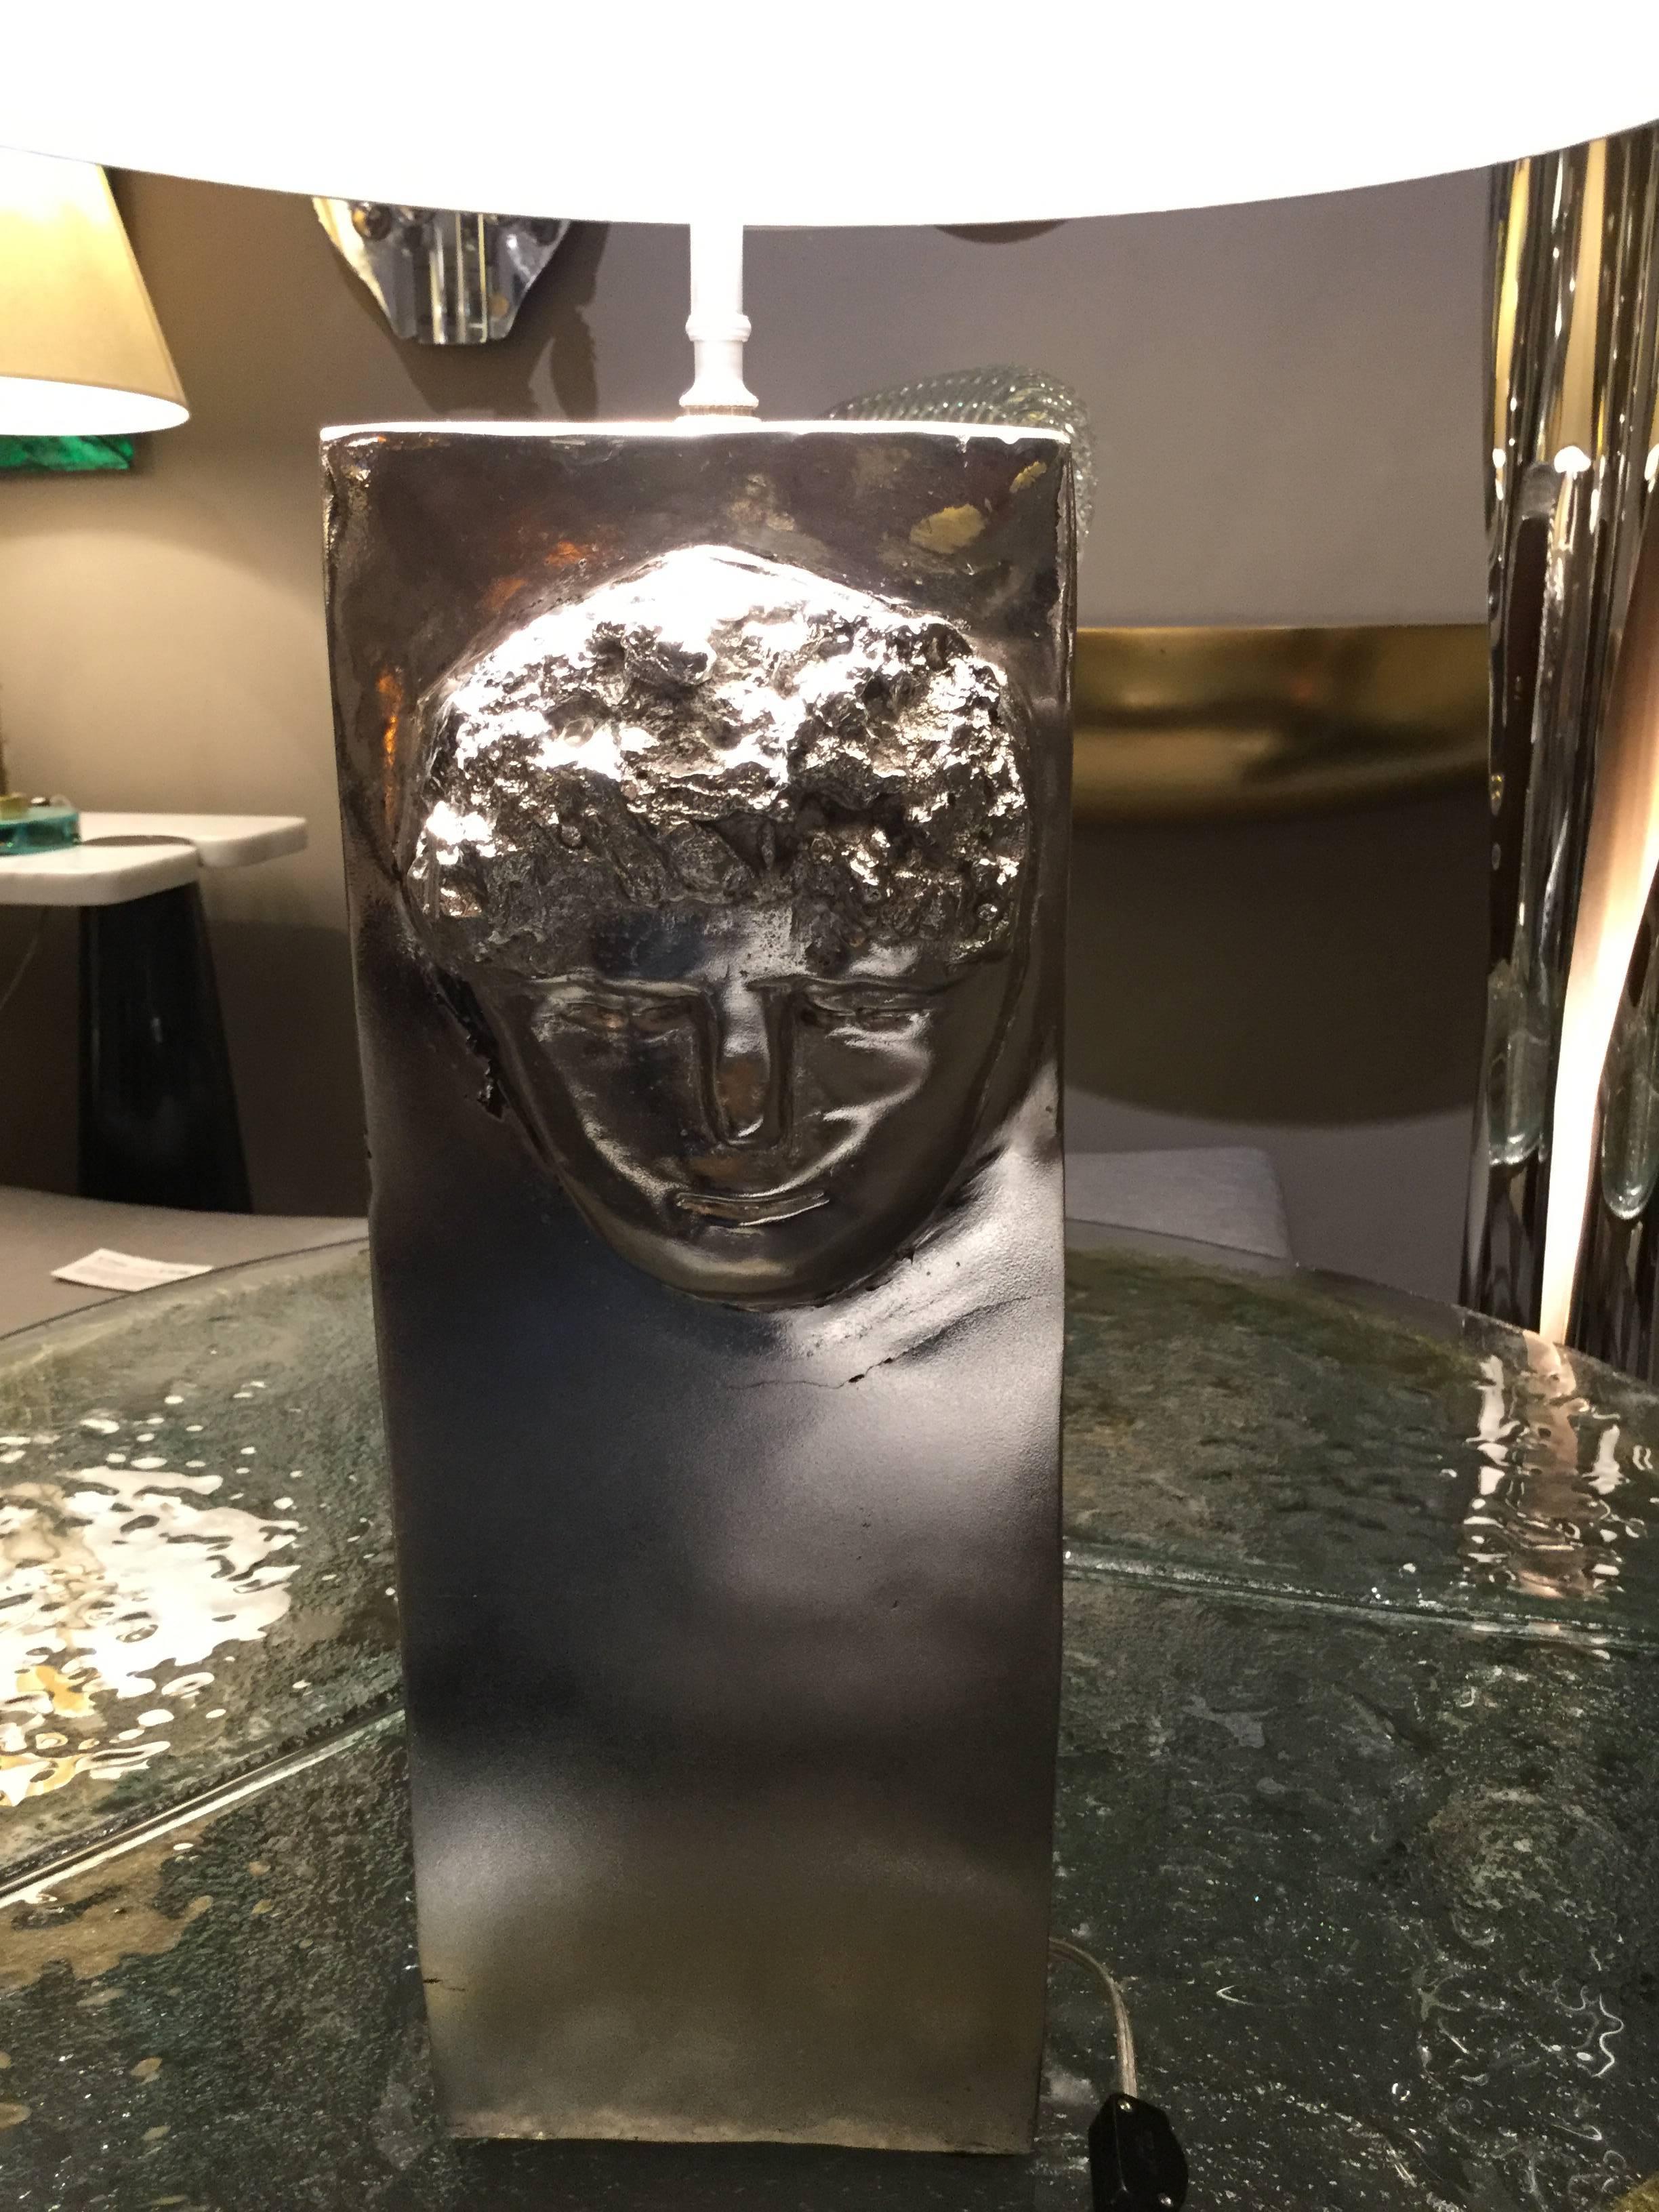 Cast aluminum cubic base, with a stylized visages facing forward and back. Inscribed signature on the base. 

(Lamp shade not included)